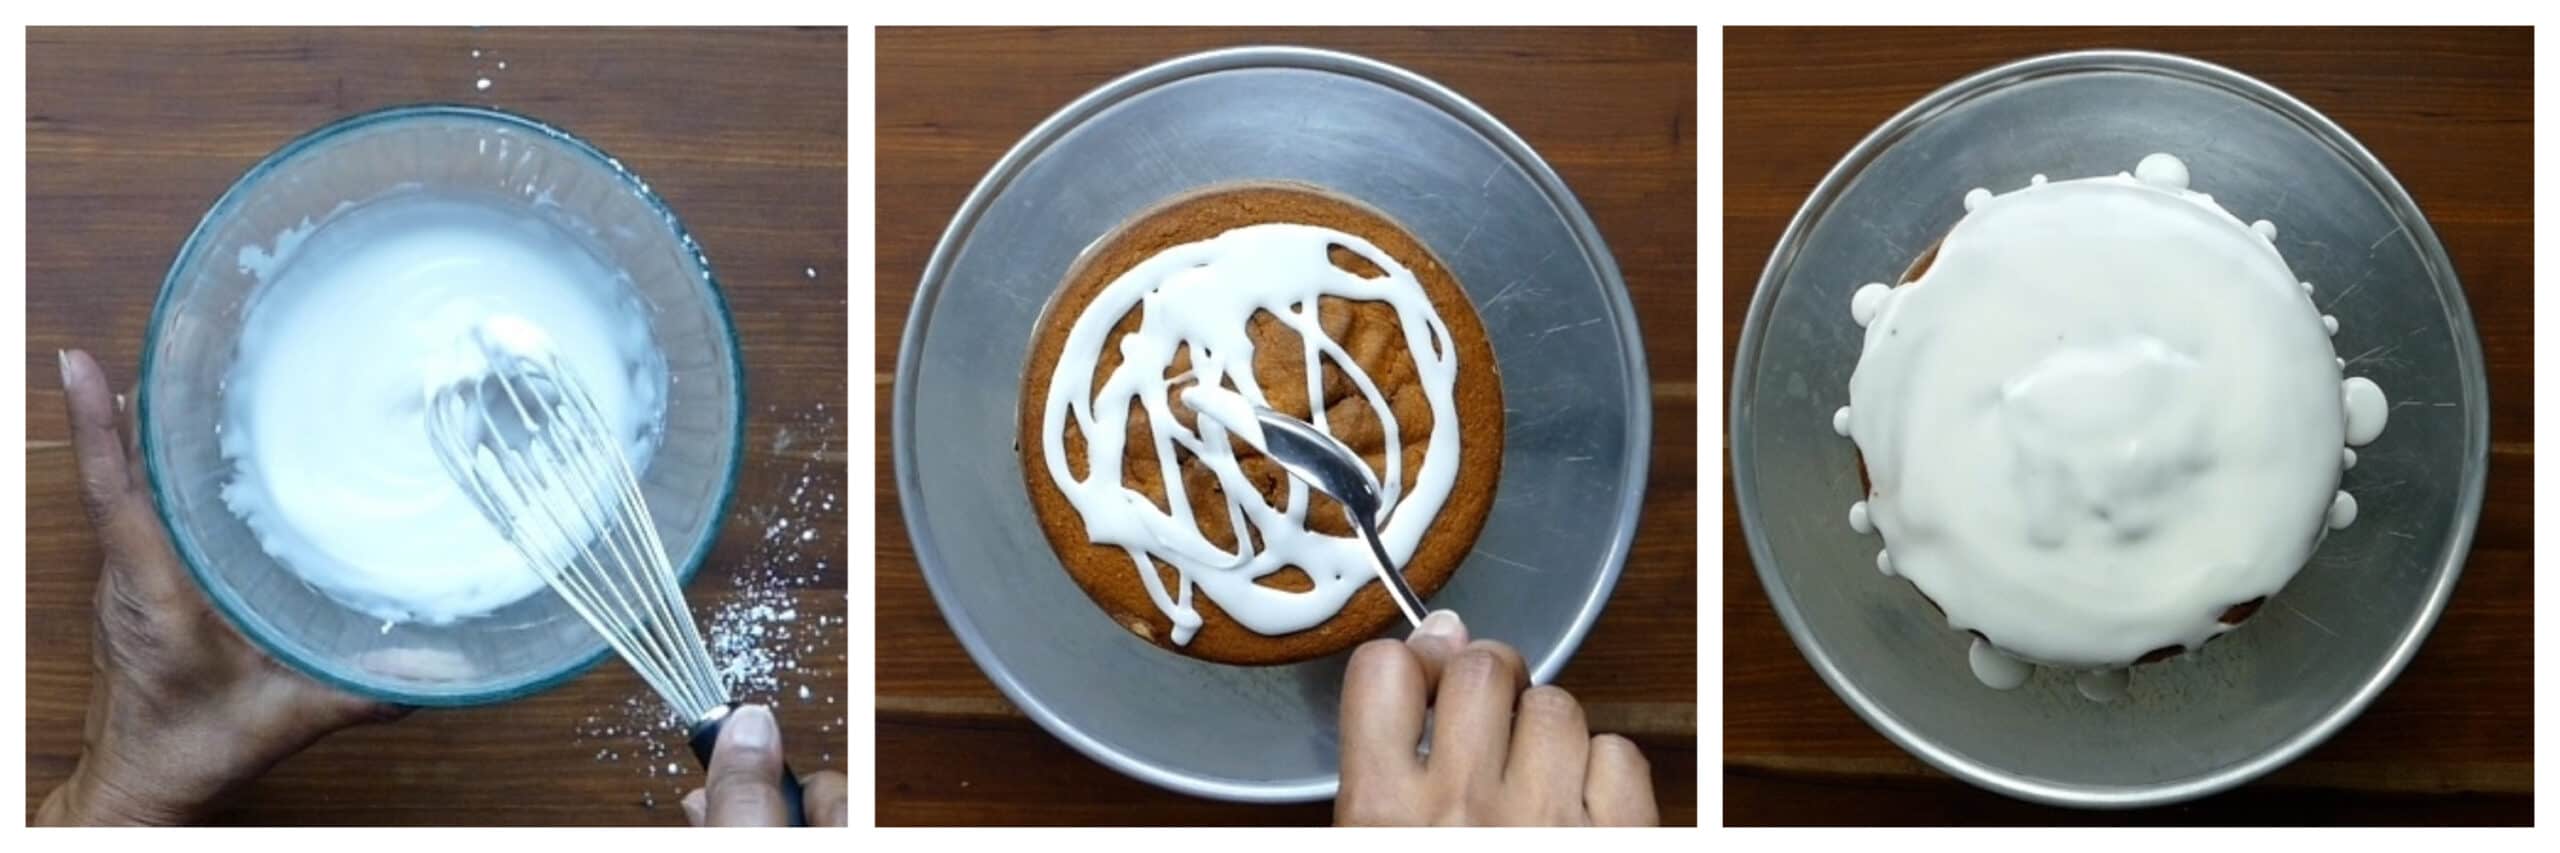 Instant Pot Air Fryer Pound Cake instructions collage - mix icing, pour icing on cake, spread icing